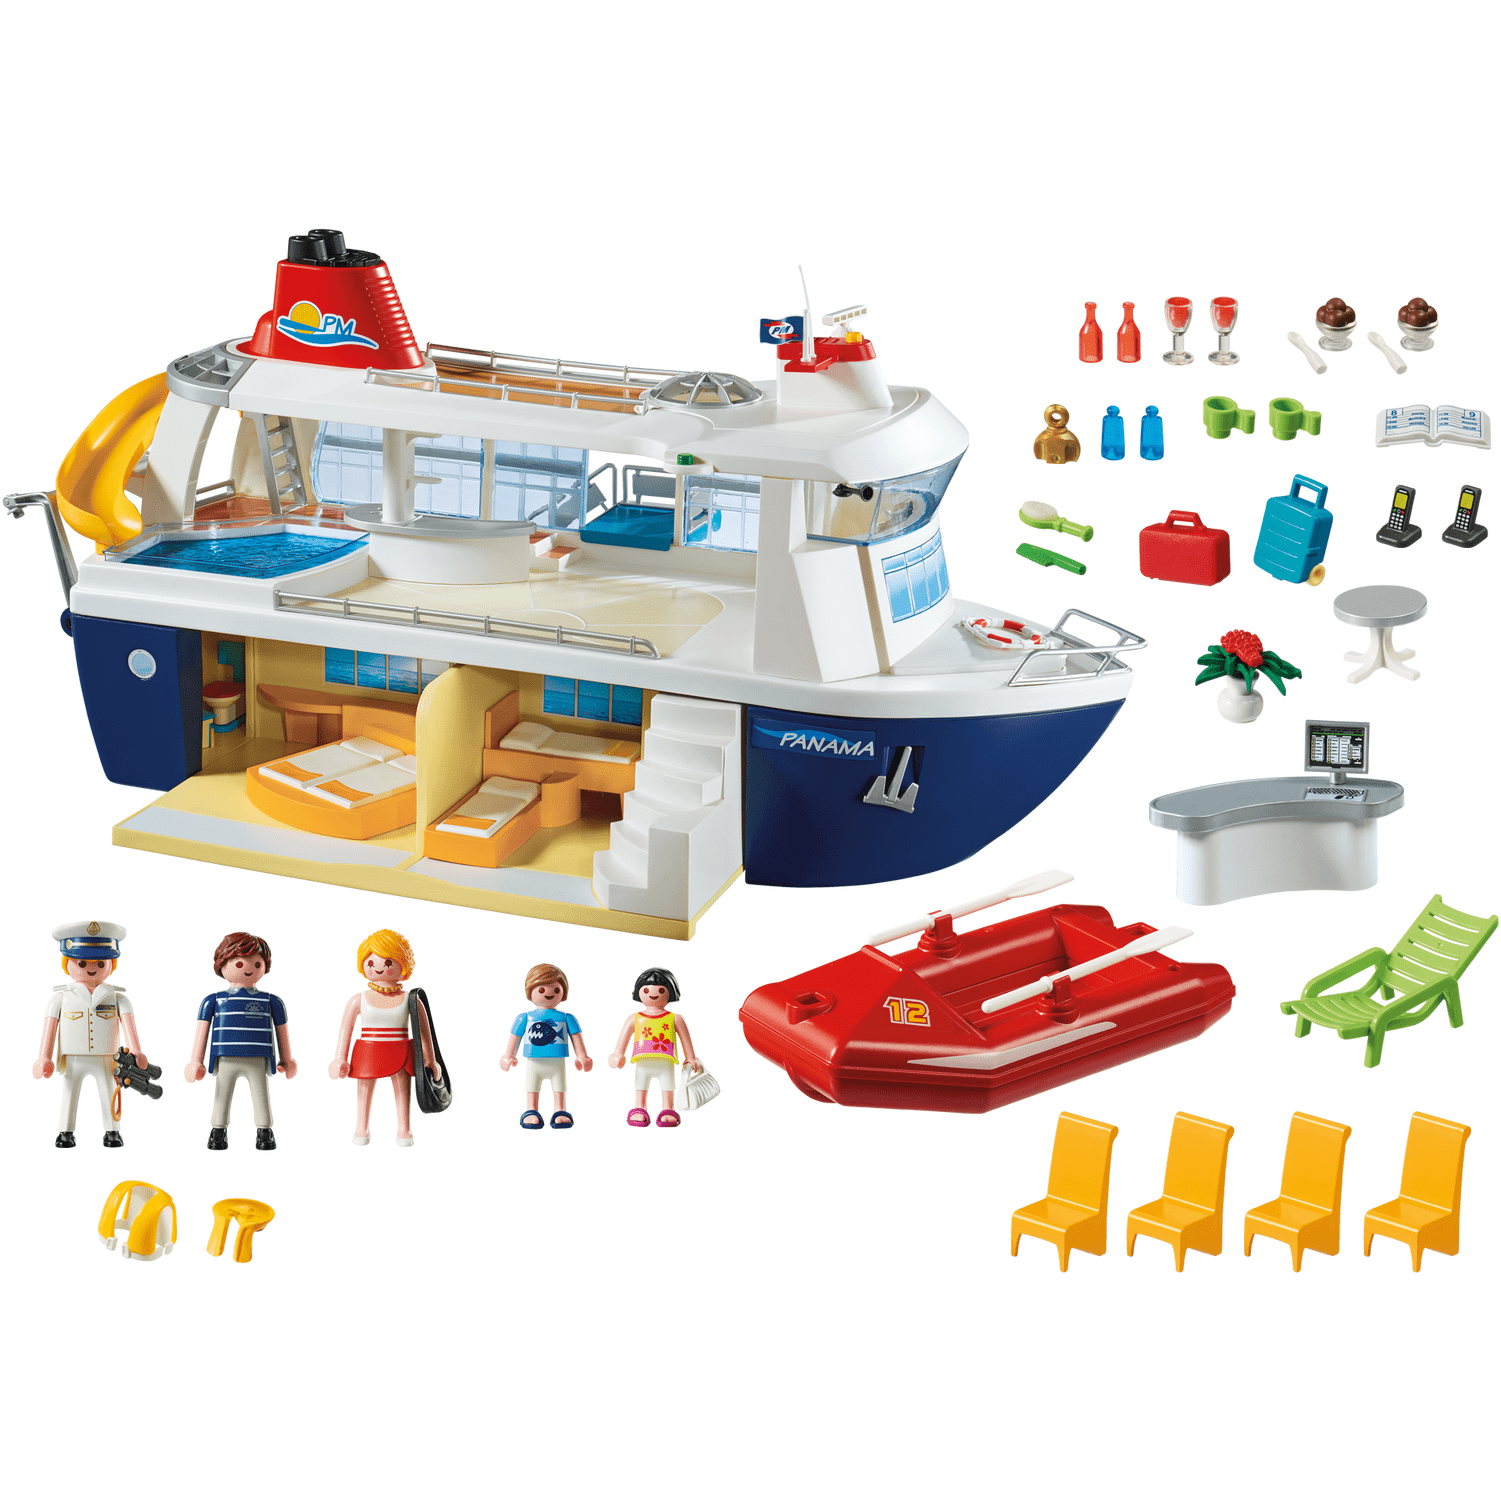 Condition Swamp depart Buy PLAYMOBIL Cruise Ship Online at Lowest Price in Vietnam. 55685685